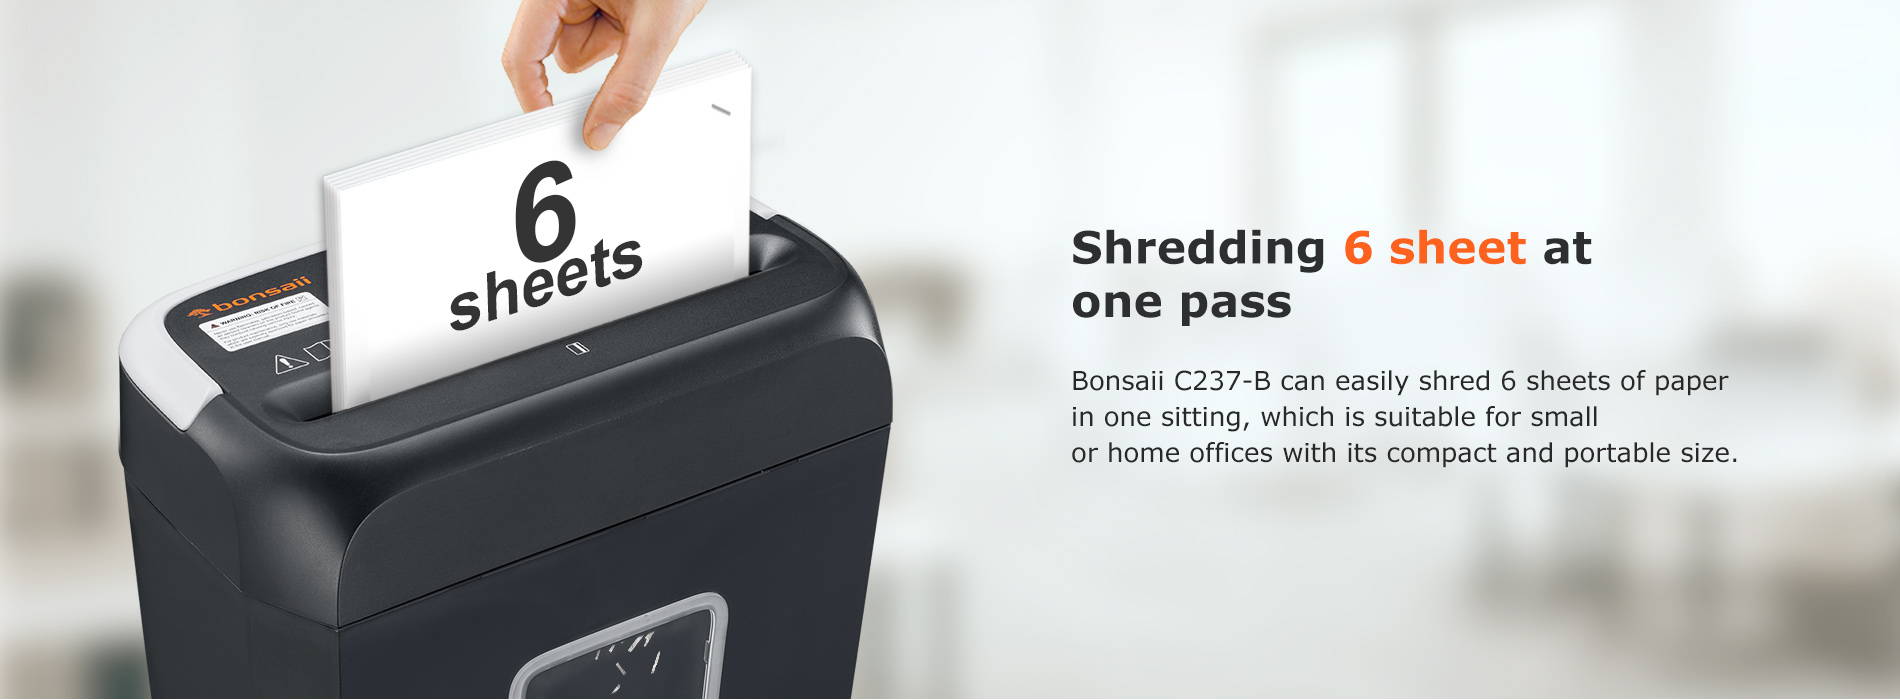 Shredding 6 sheet at one pass Bonsaii C237-B can easily shred 6 sheets of paper in one sitting, which is suitable for small or home offices with its compact and portable size.